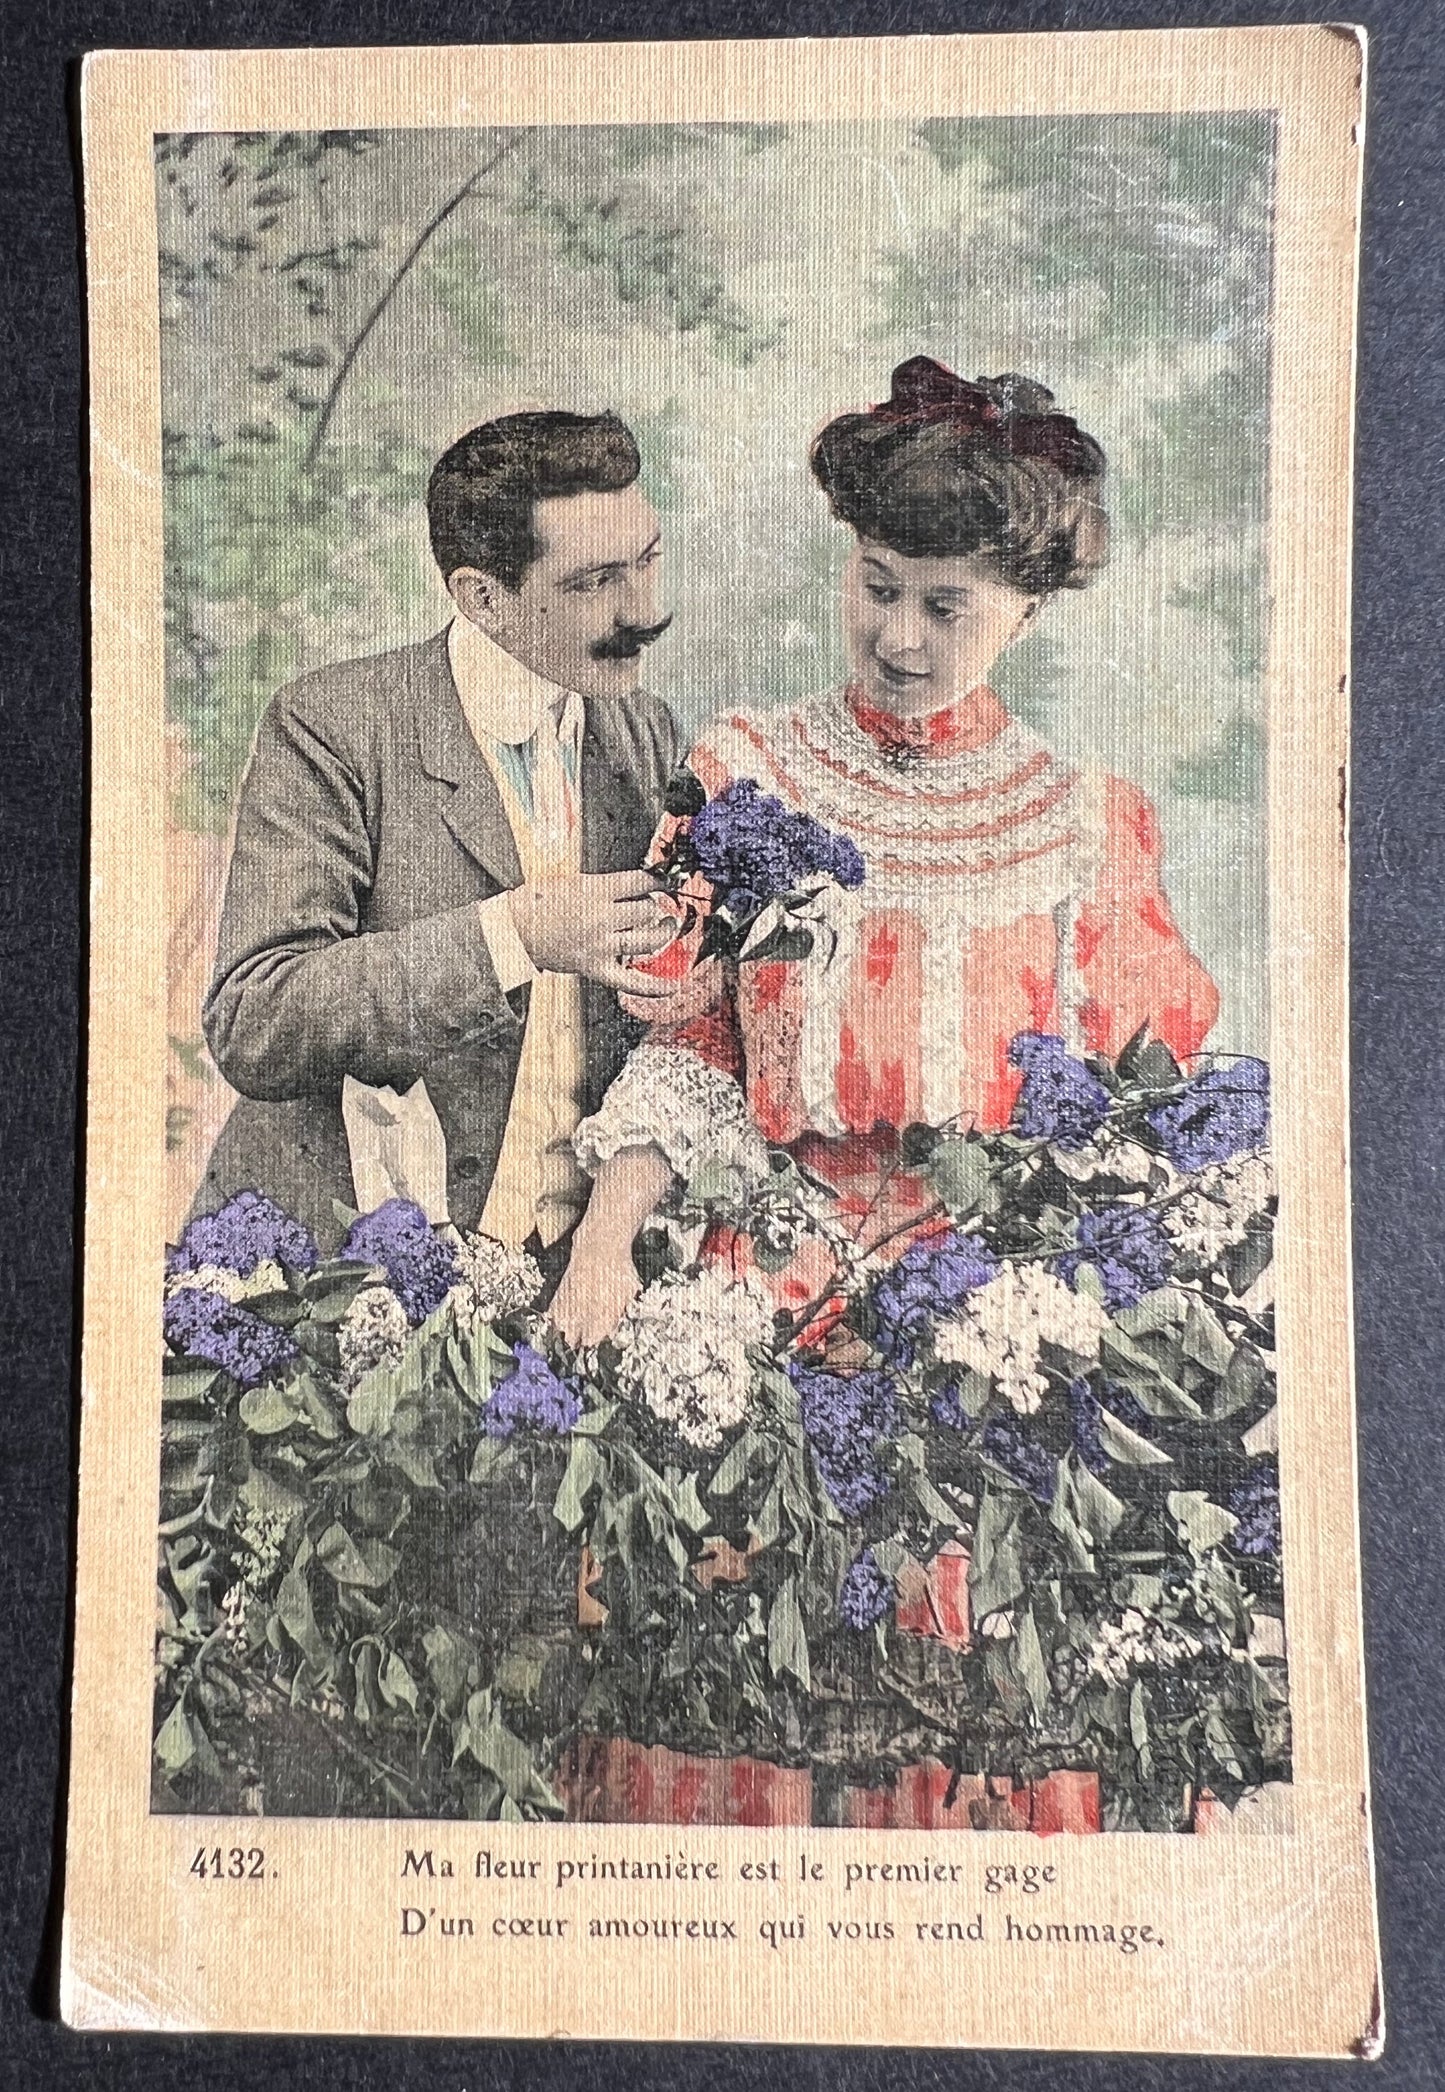 Well Presented Couple on this French Romantic Postcard